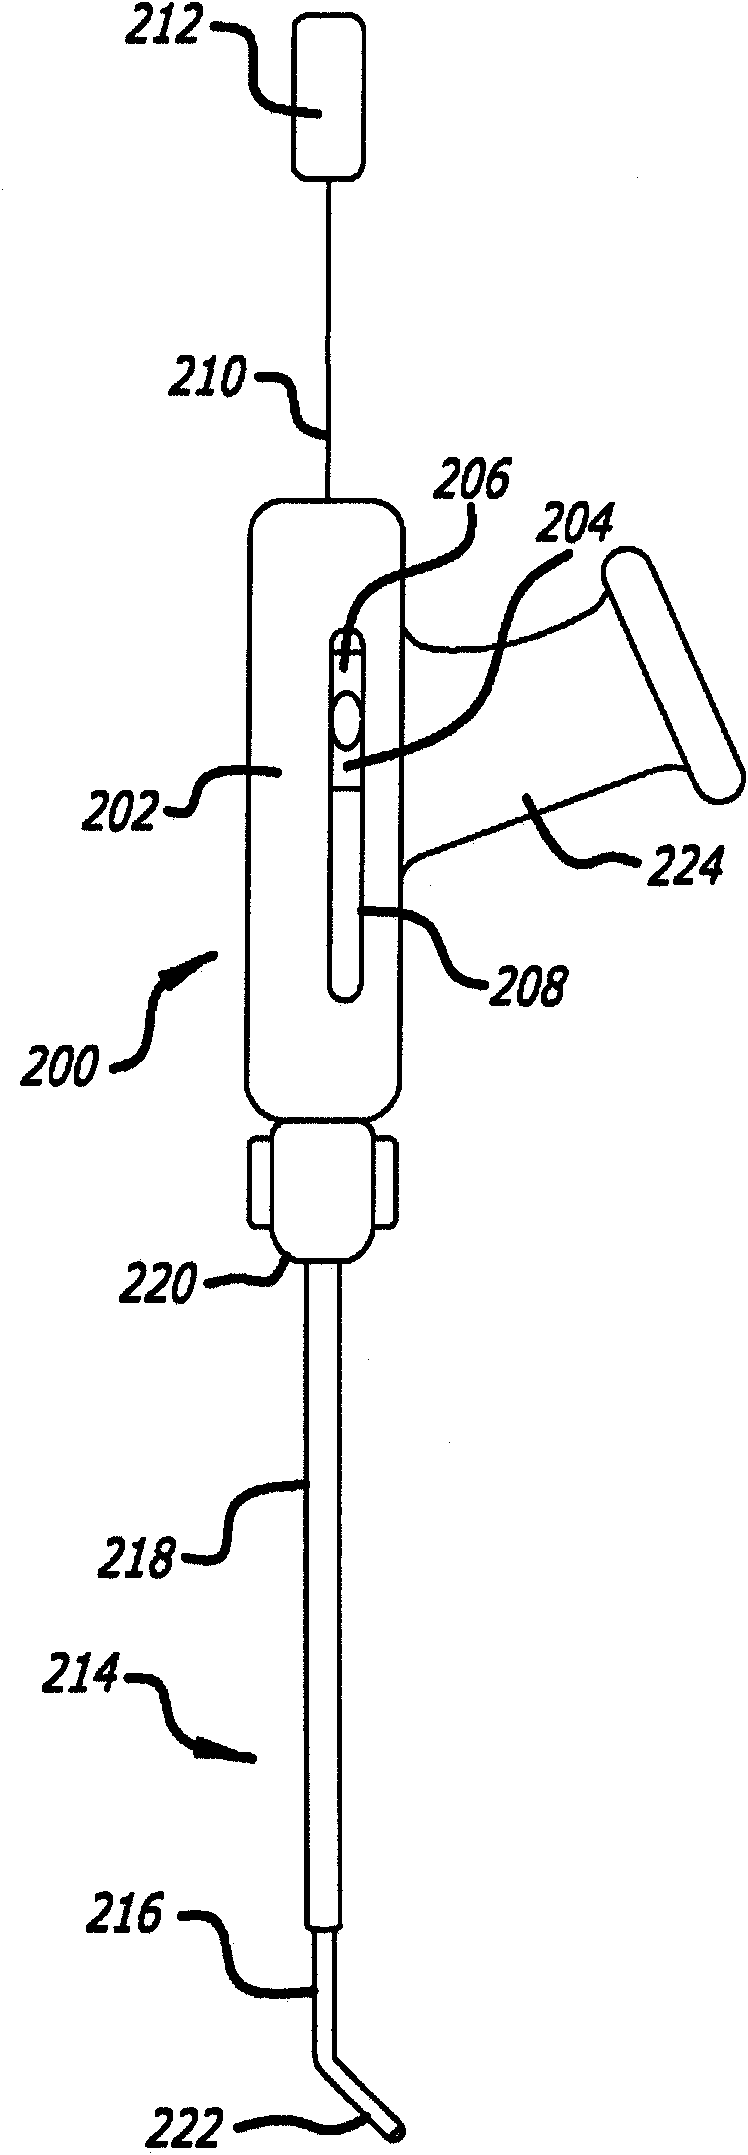 Methods and apparatus for treating disorders of ear nose and throat